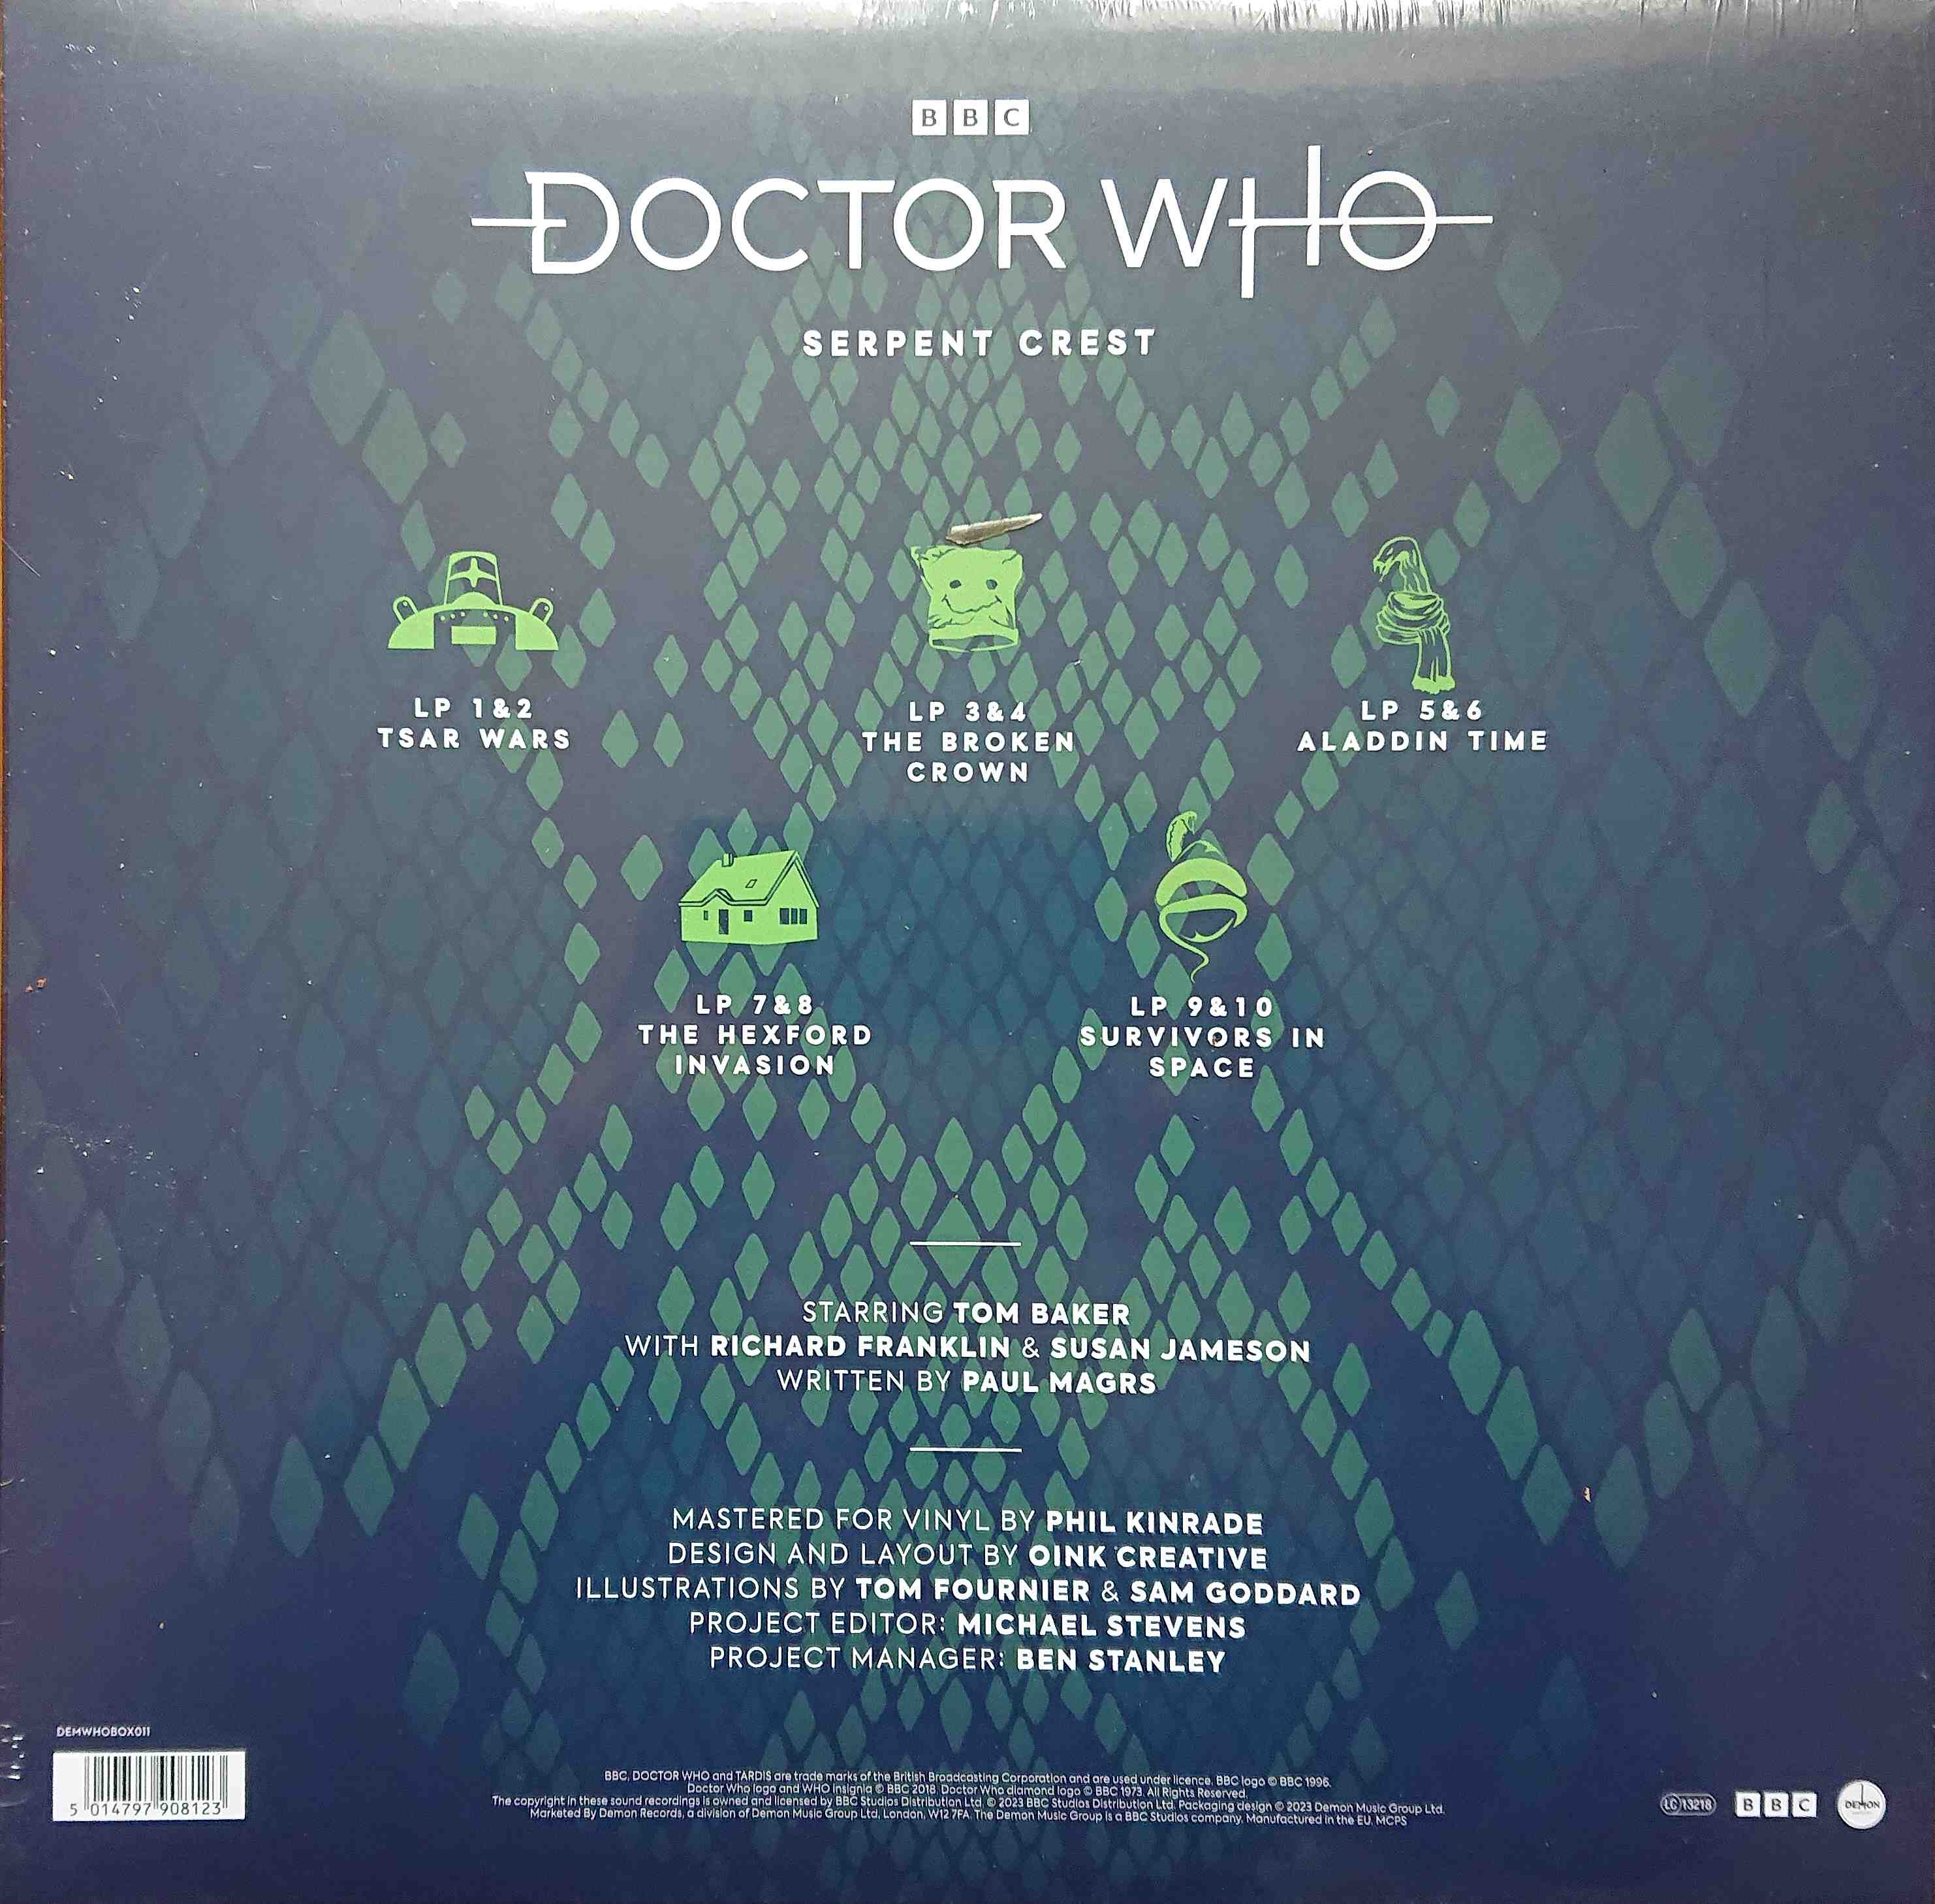 Picture of DEMWHOBOX011 Doctor Who - Serpent Crest by artist Paul Magrs from the BBC records and Tapes library